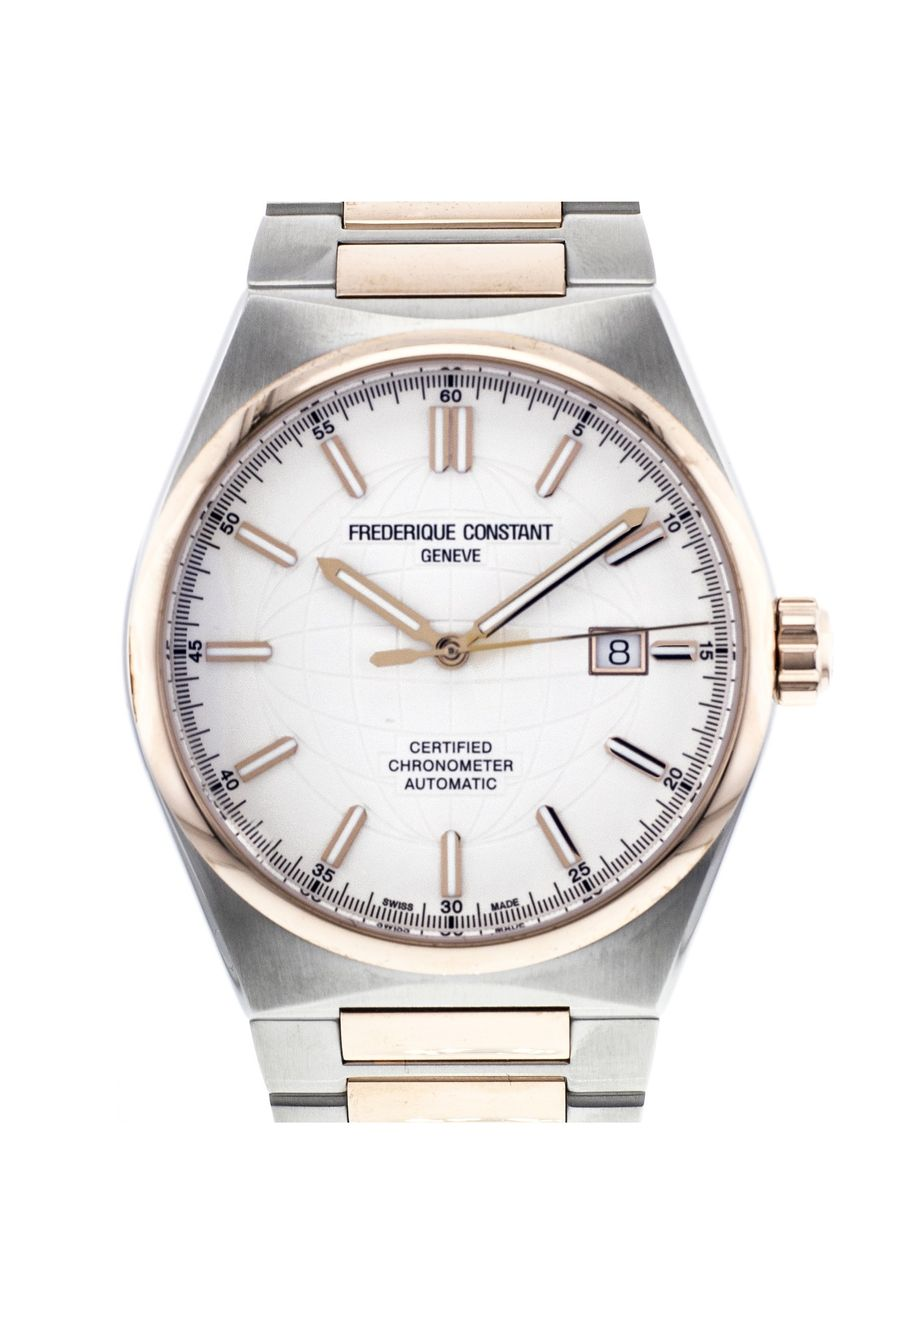 FREDERIQUE CONSTANT Highlife Automatic COSC